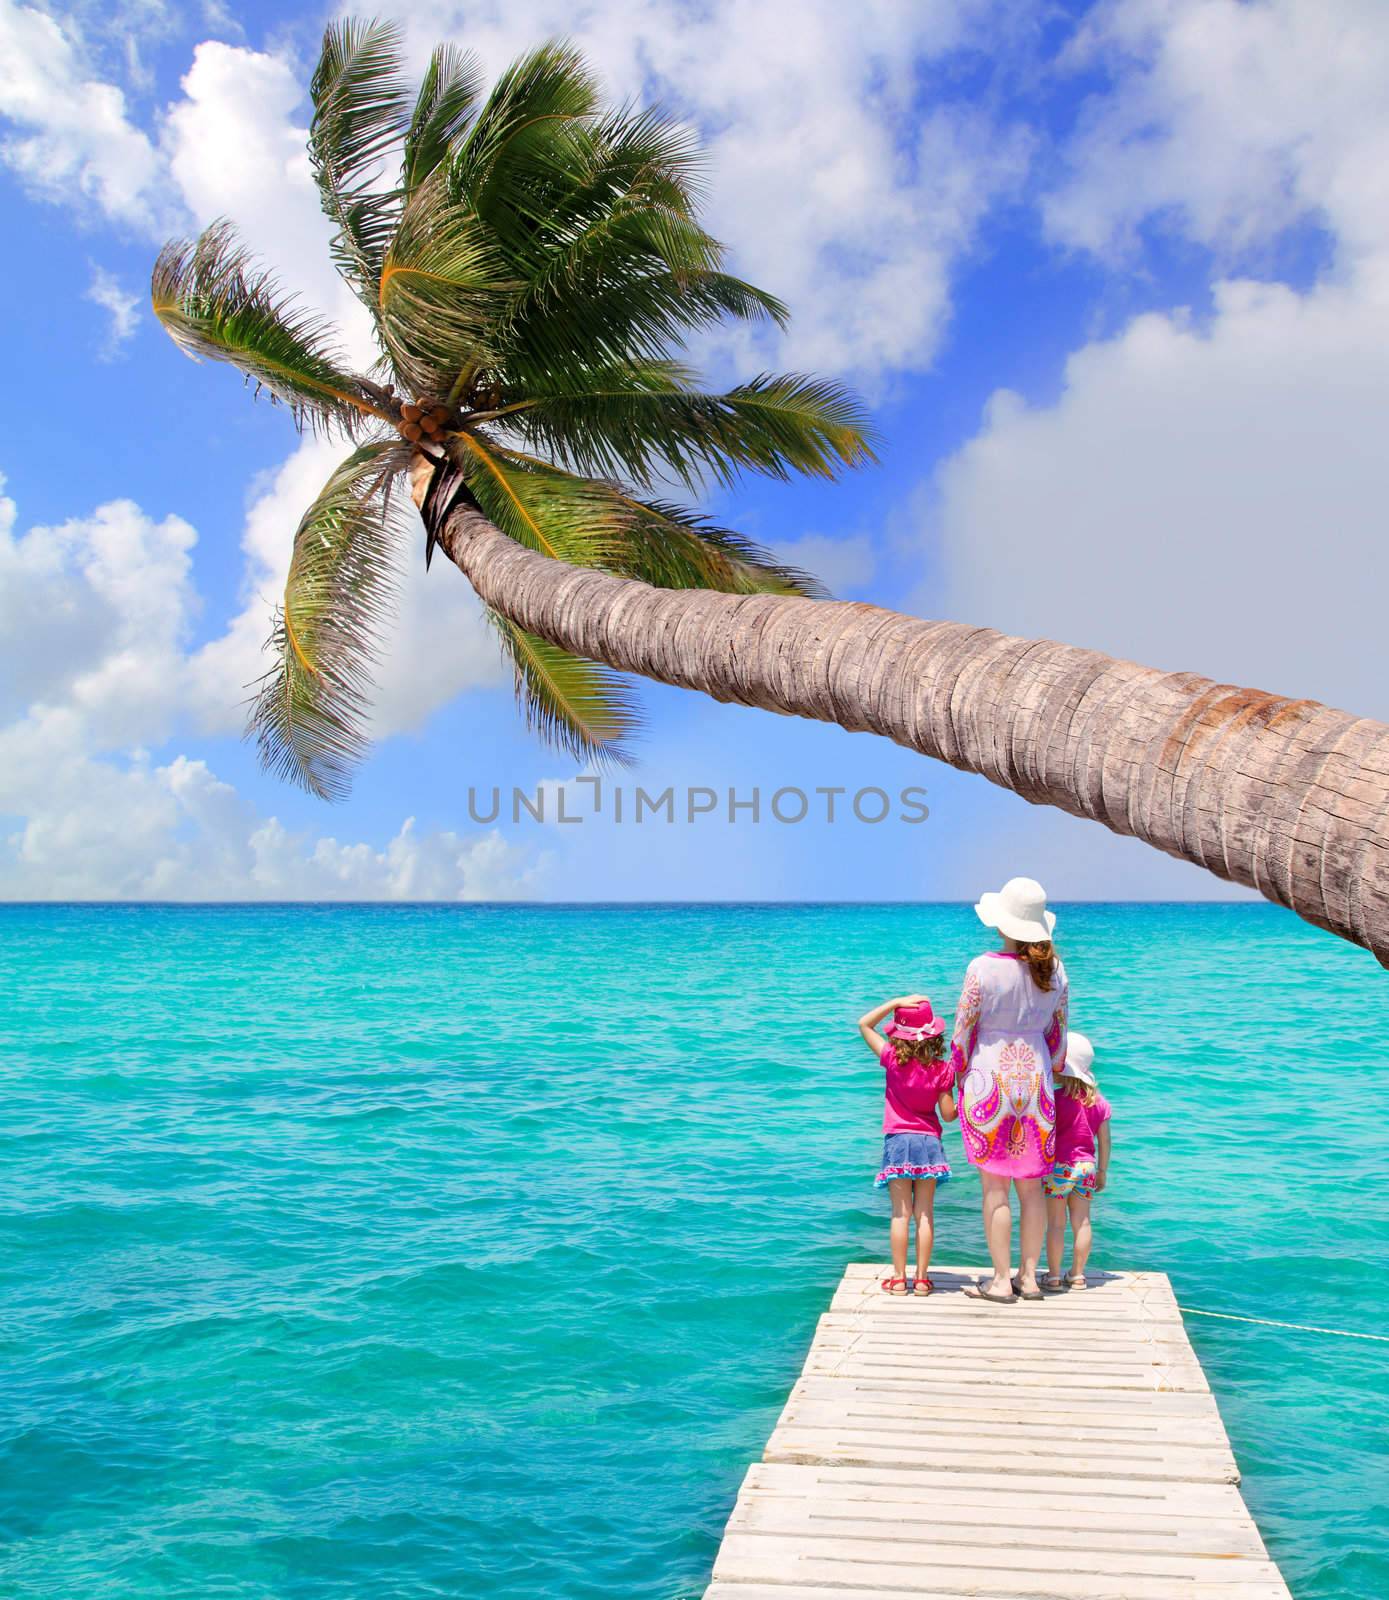 Daughters and mother in jetty on tropical beach by lunamarina